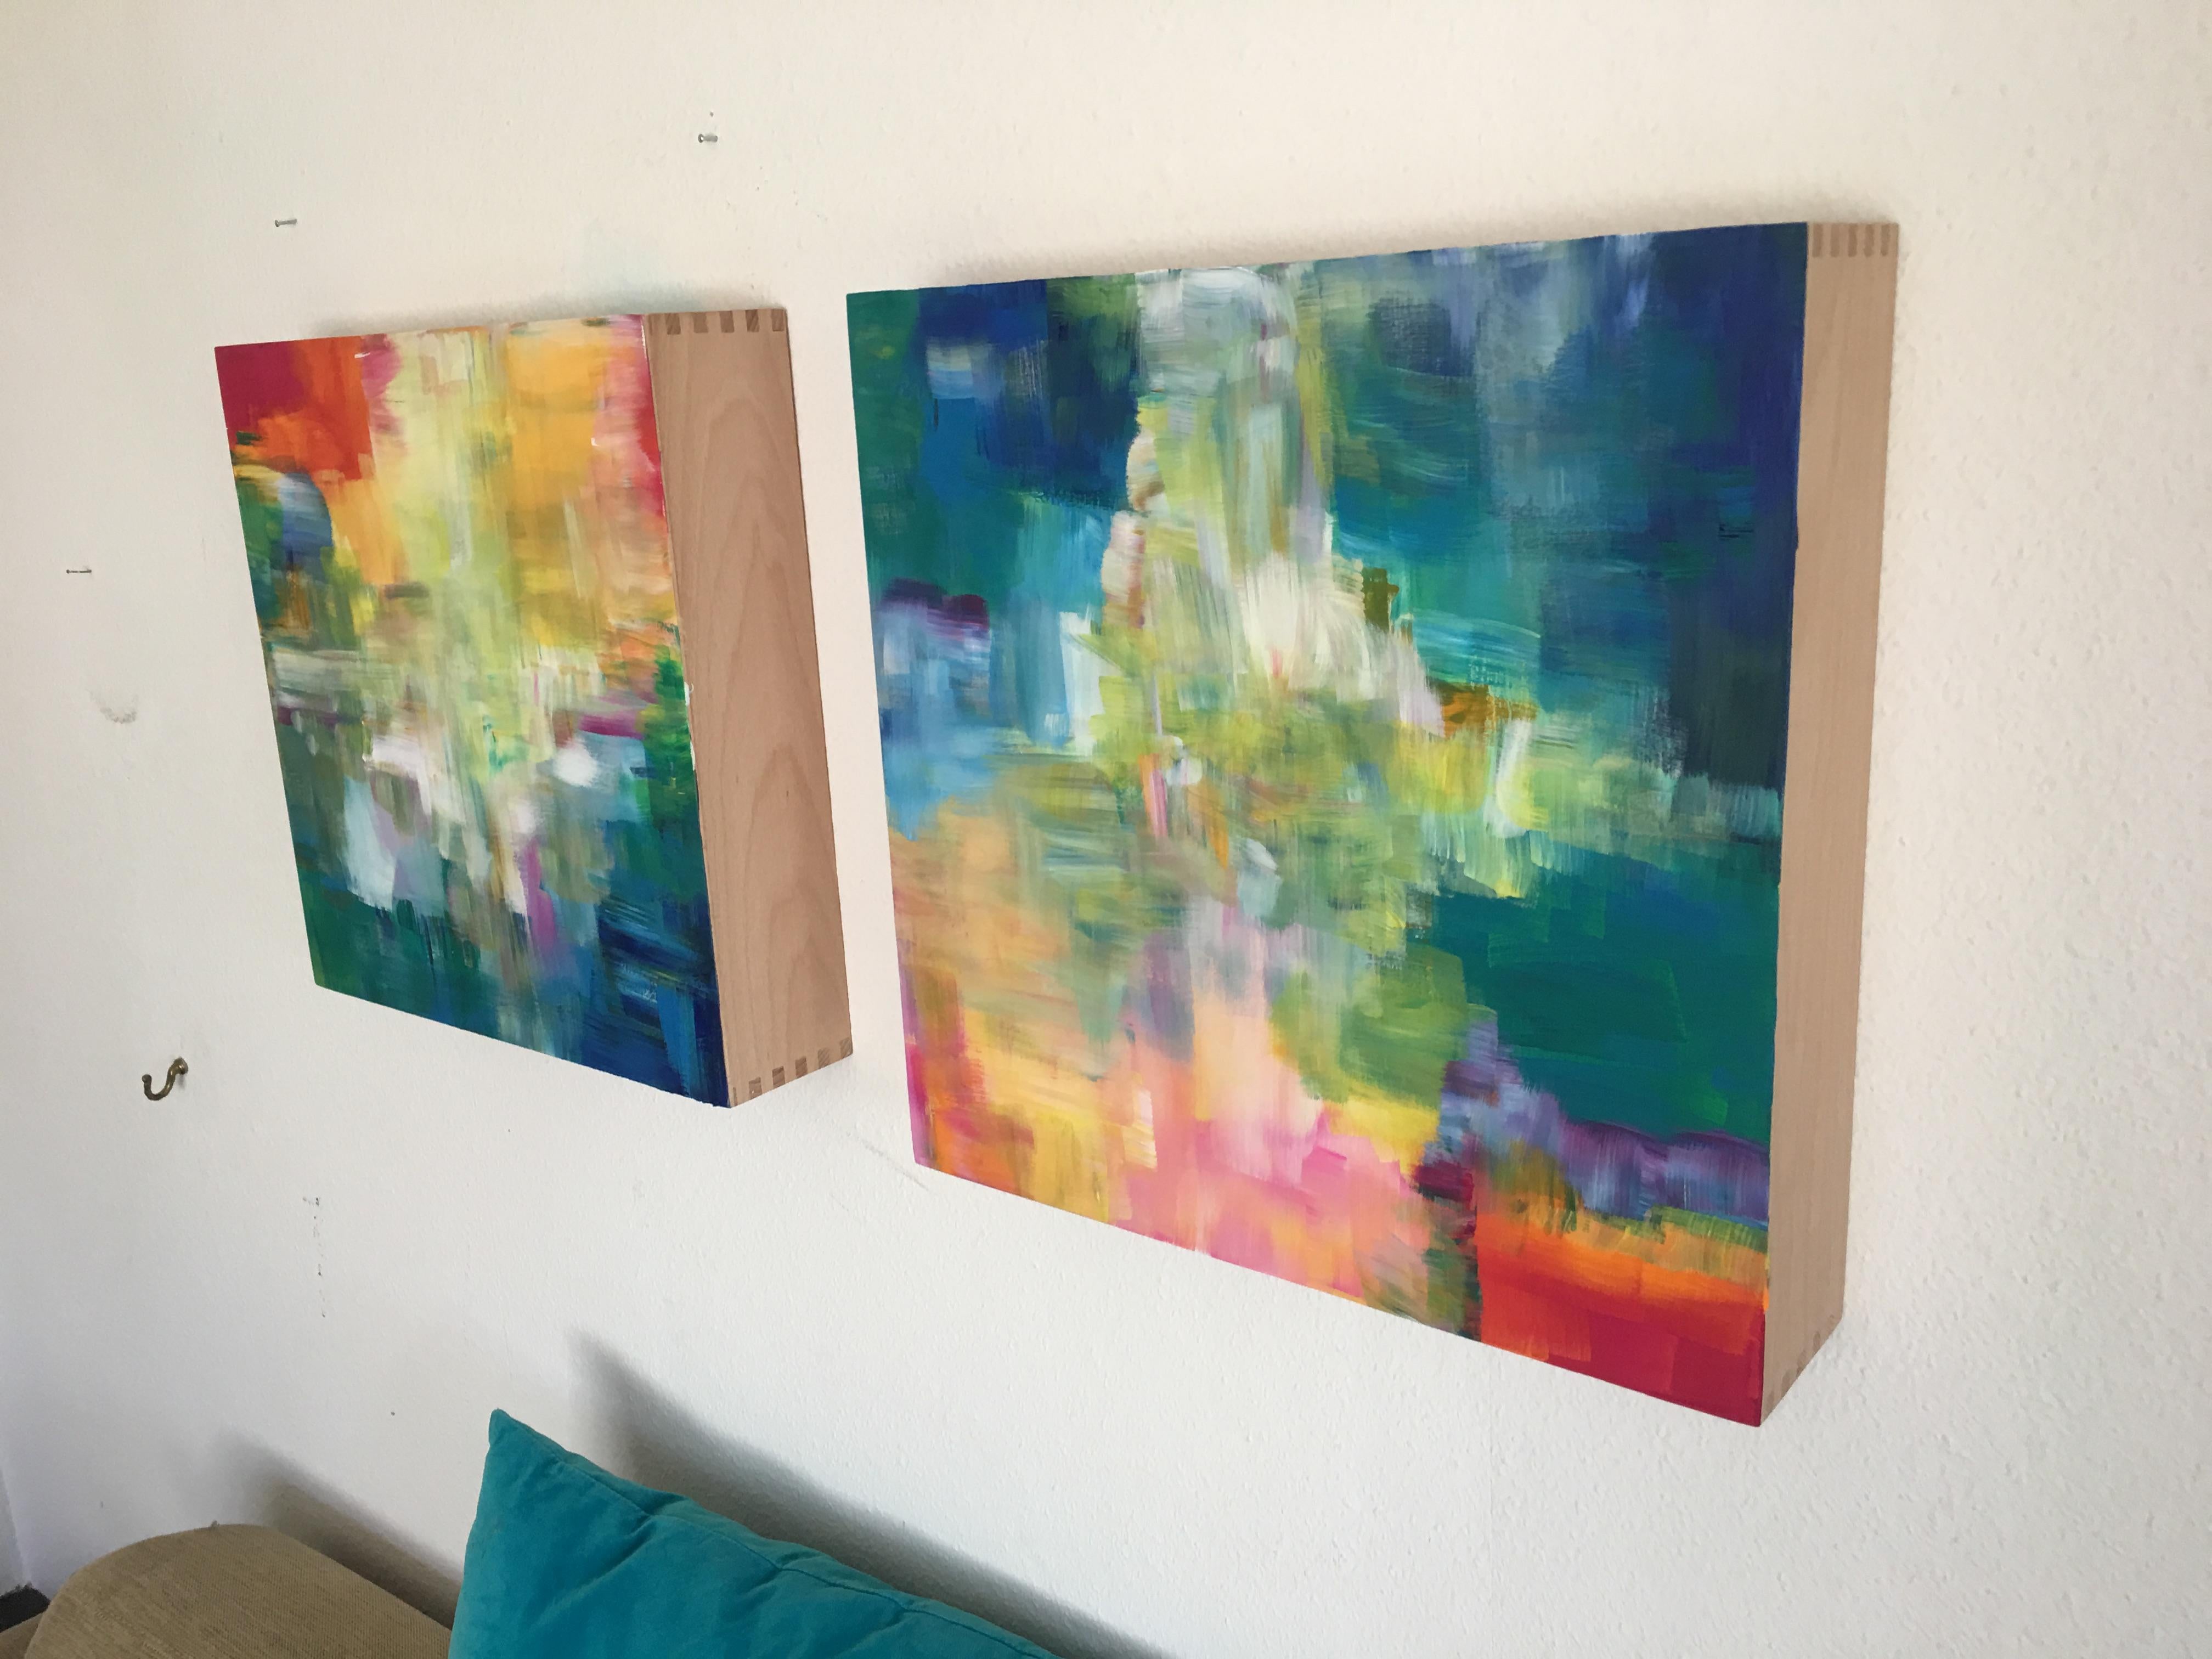 Sun and Light by Katharina Husslein - Four abstract paintings on wood 5